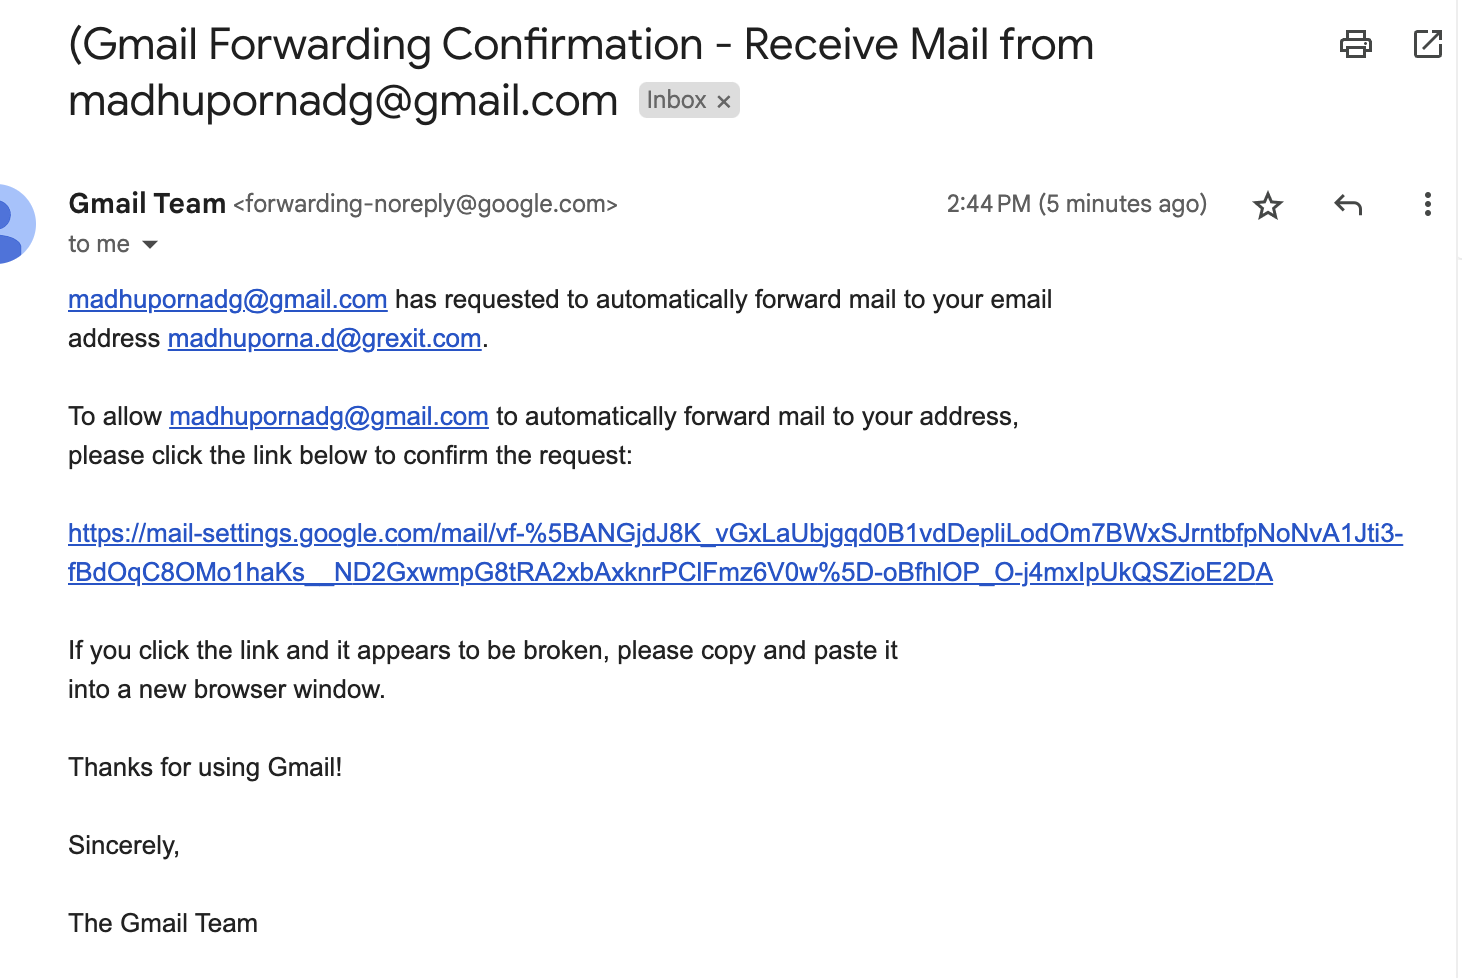 forwarding confirmation for merging gmail accounts